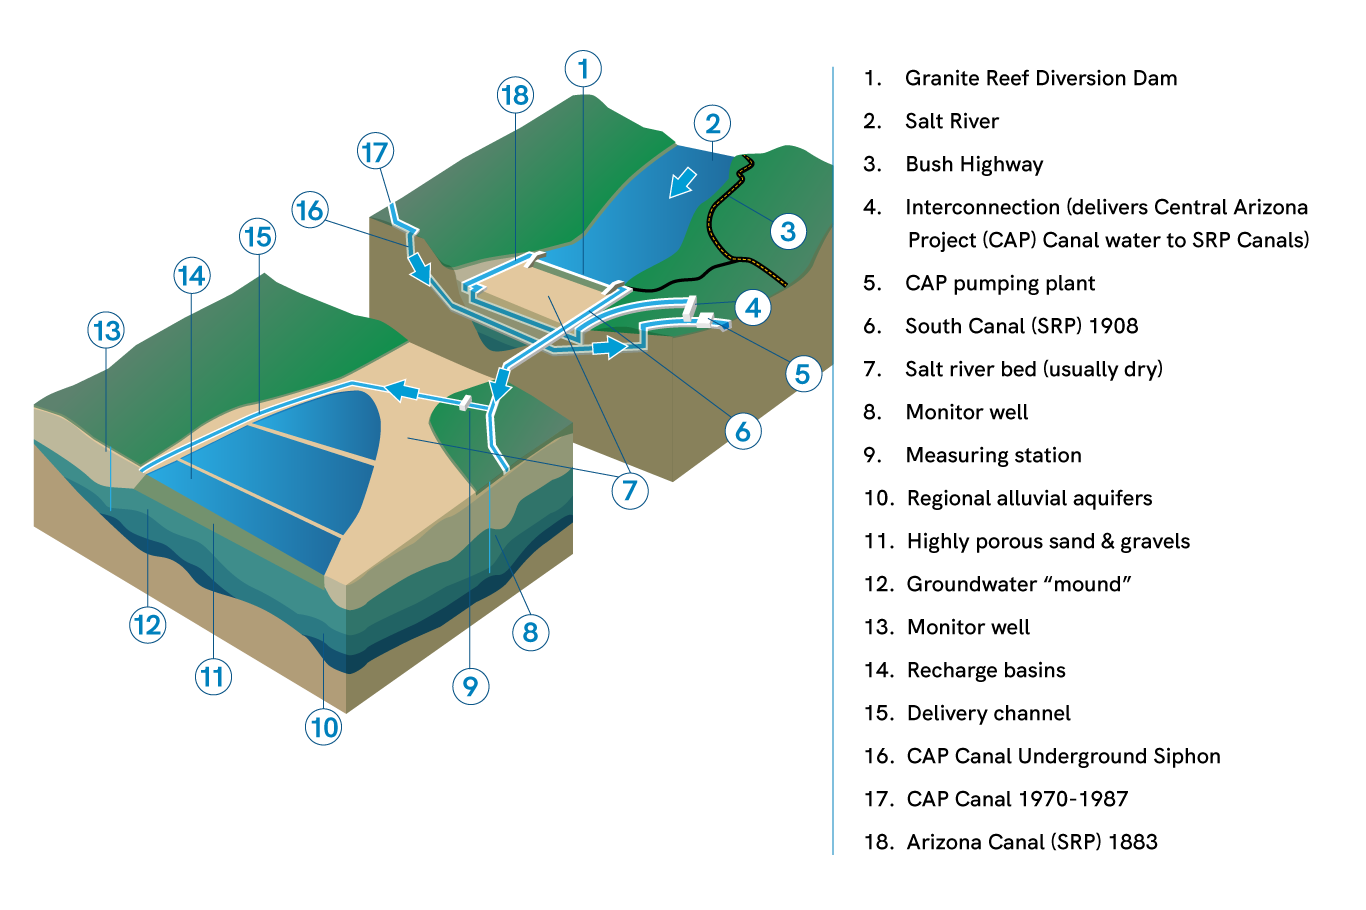 This diagram shows how GRUSP works - from water in the Salt River being directed into underground aquifers through canals and pumps. 